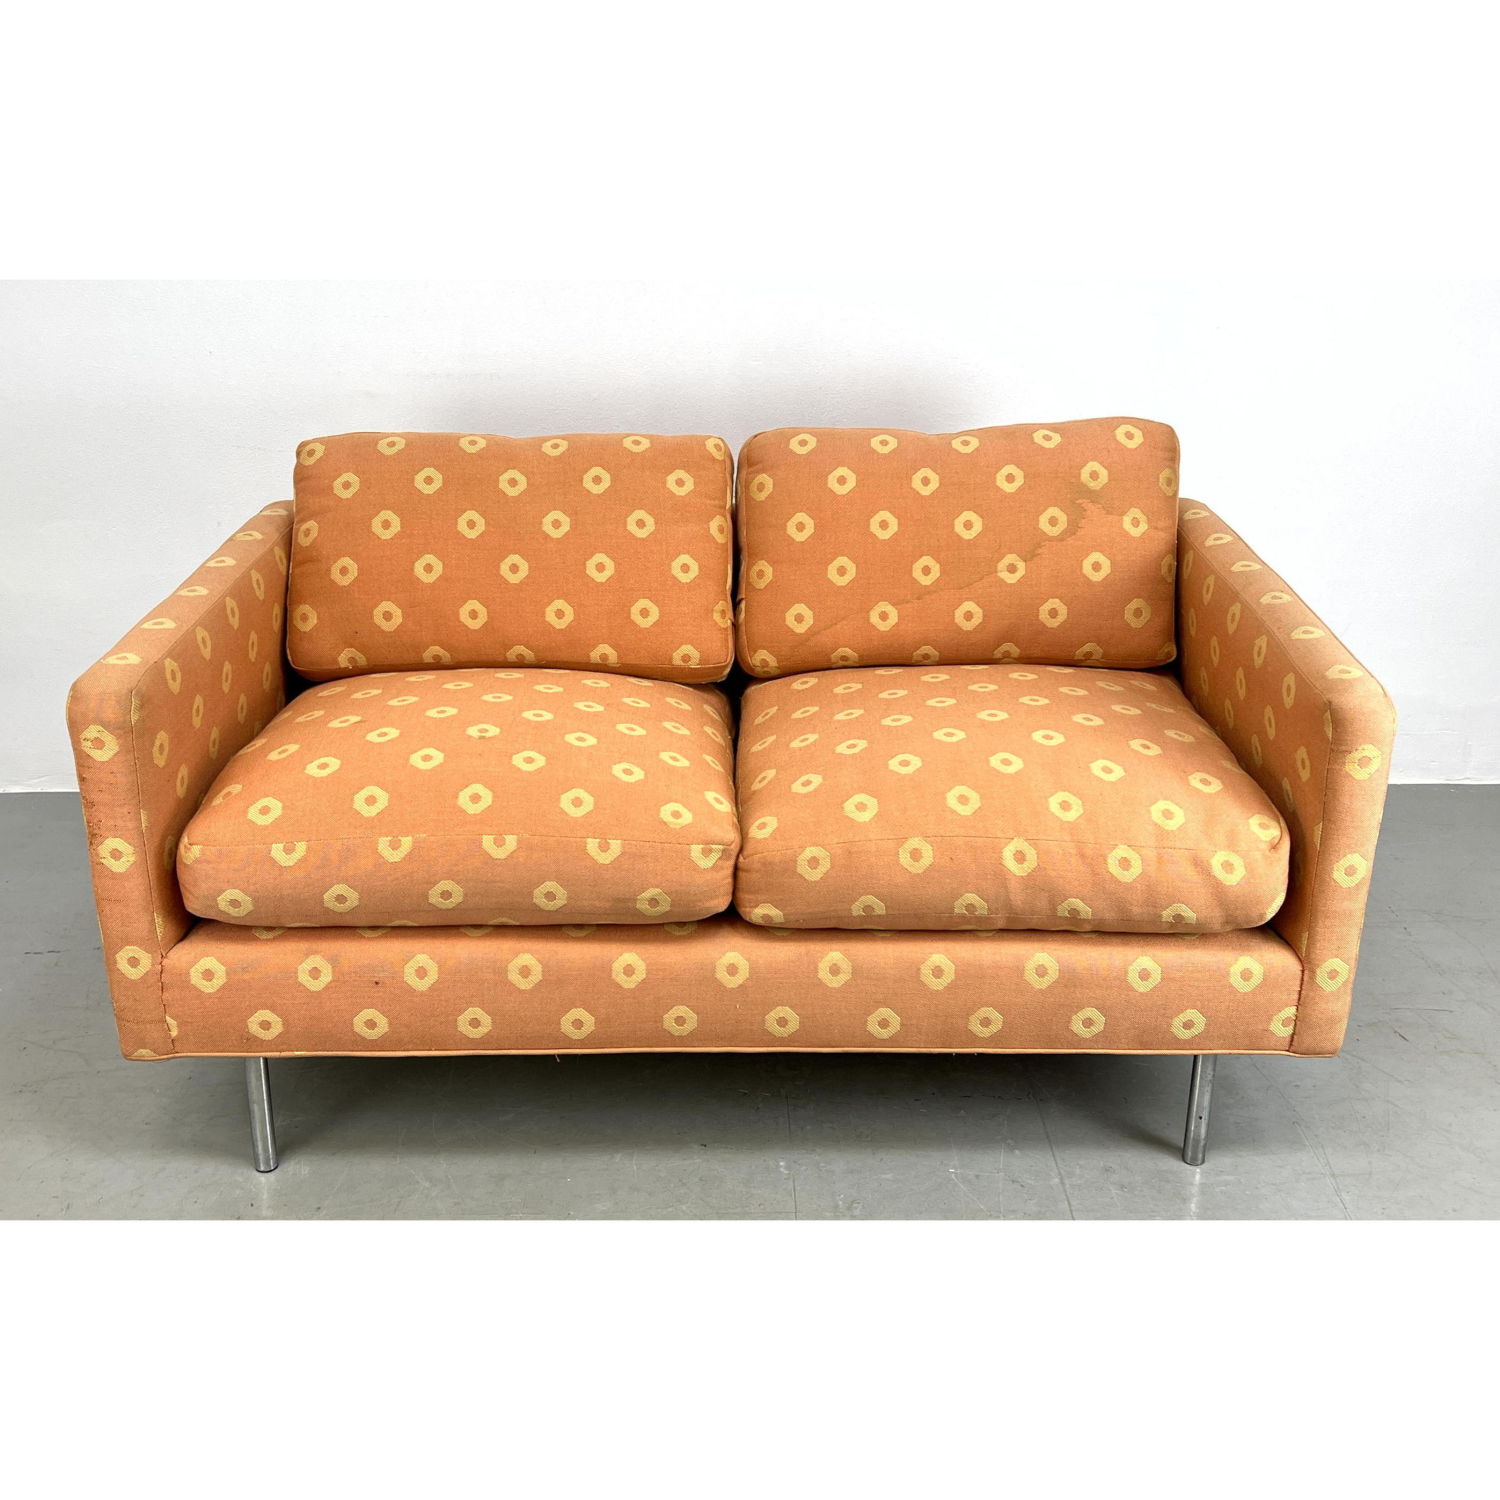 Patterned Upholstered Love Seat.